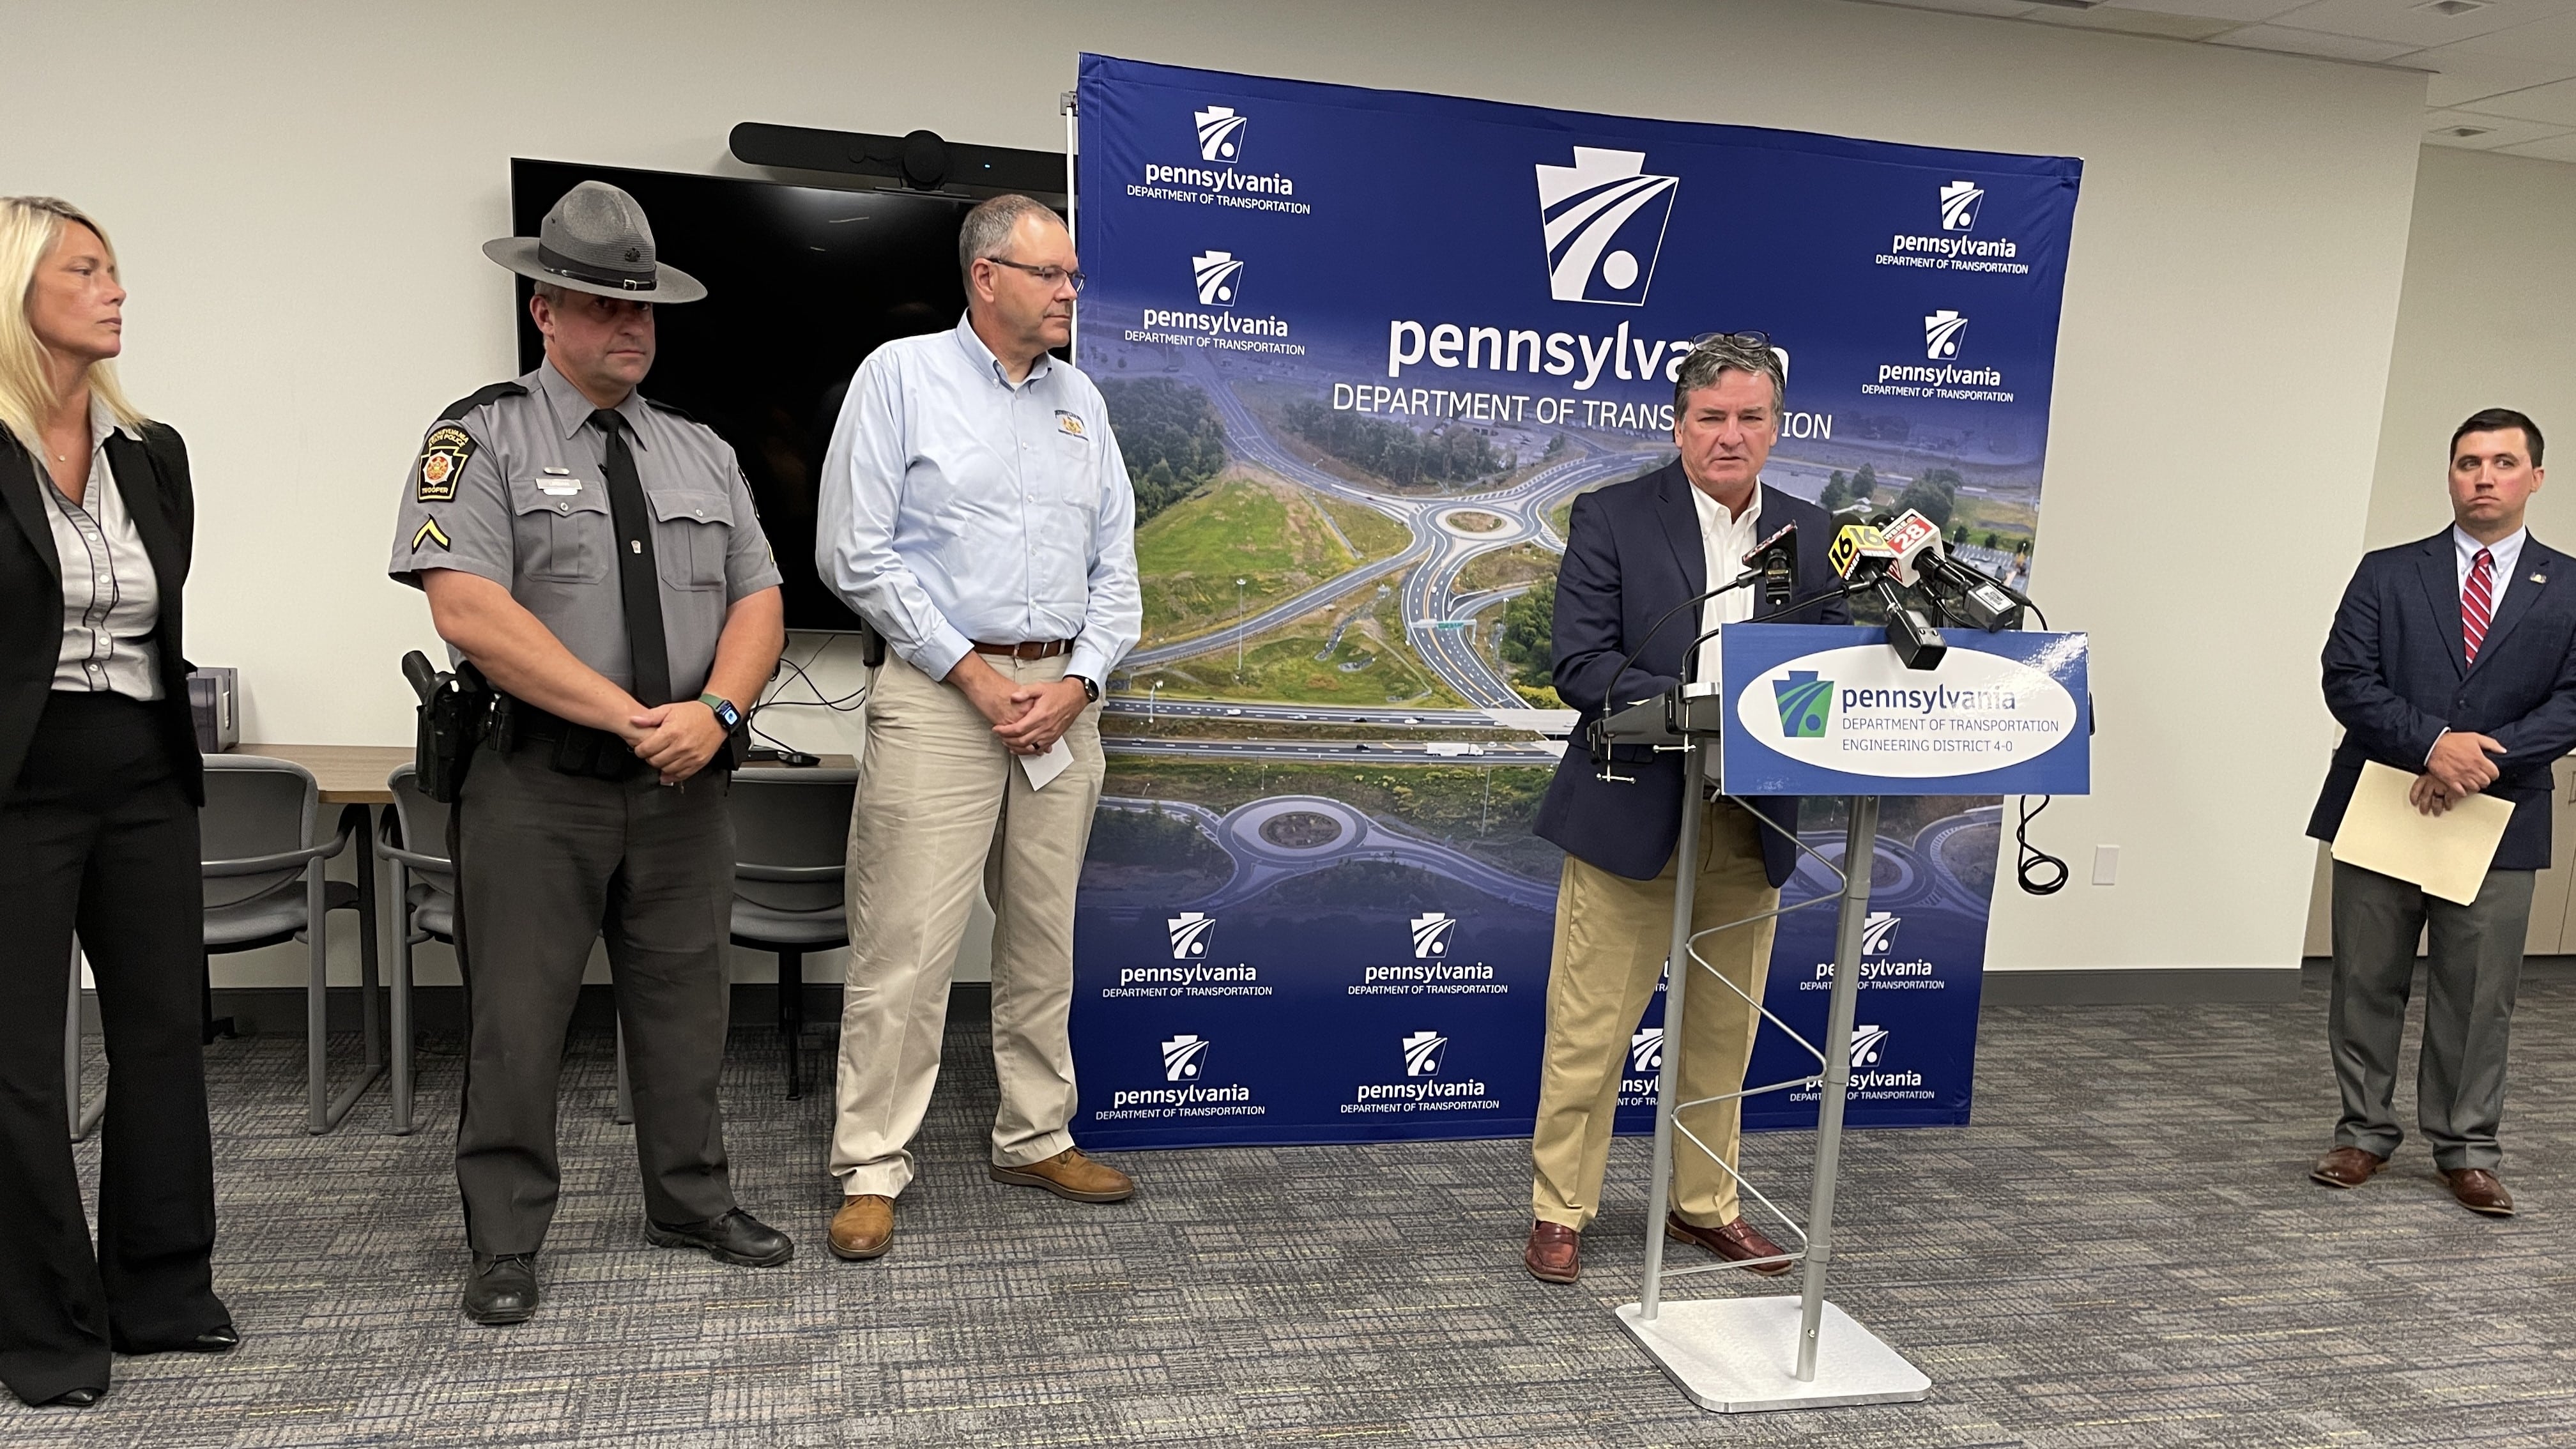 An image of PennDOT Secretary Michael Carroll, joined by other officials, speaking at a press conference from behind a podium with a backdrop behind him showing the PennDOT logo and the words Pennsylvania Department of Transportation